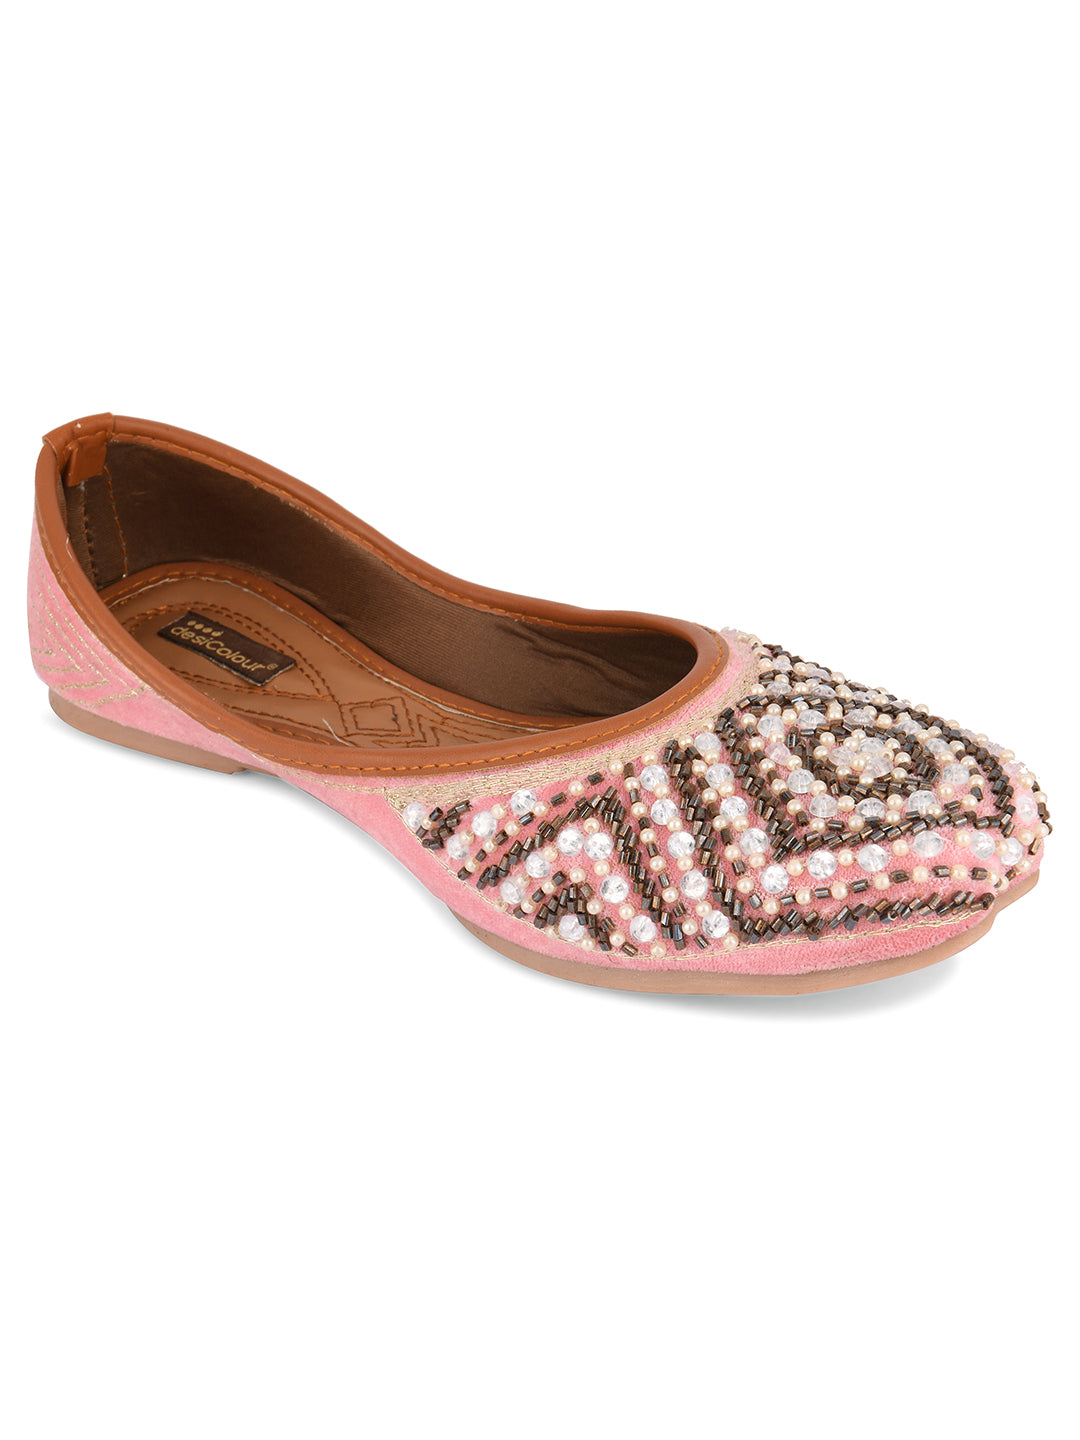 Women's Soft Pink Hand Embroidered  Indian Ethnic Comfort Footwear - Desi Colour